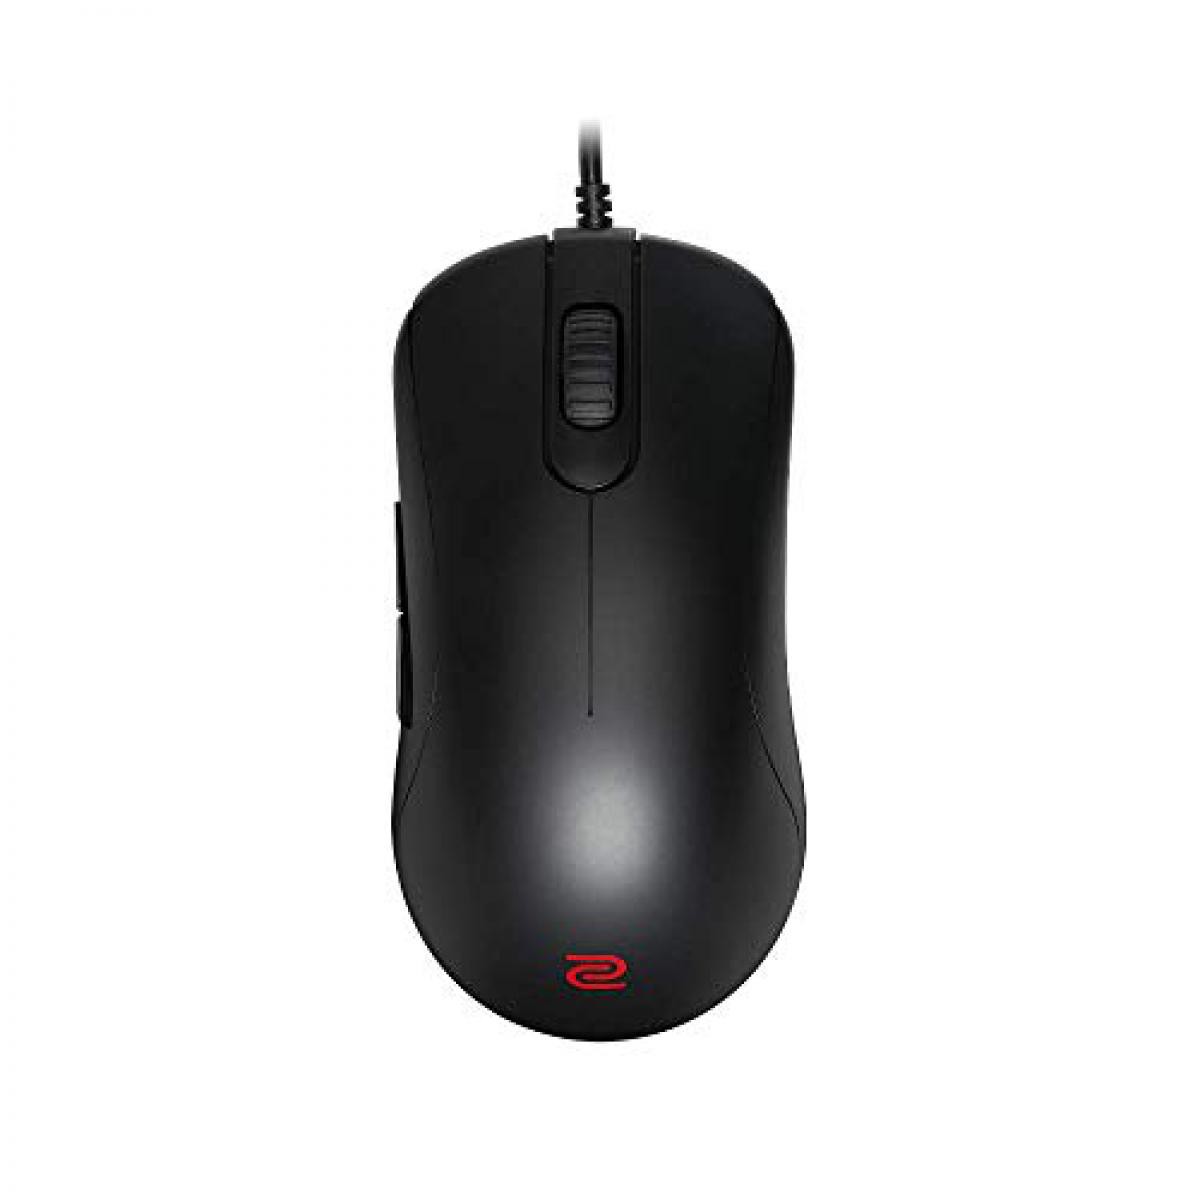 Zowie - ZOWIE GEAR MOUSE ZA12-B Middle size Droitier *9H.N2VBB.A2E*3280 - Souris